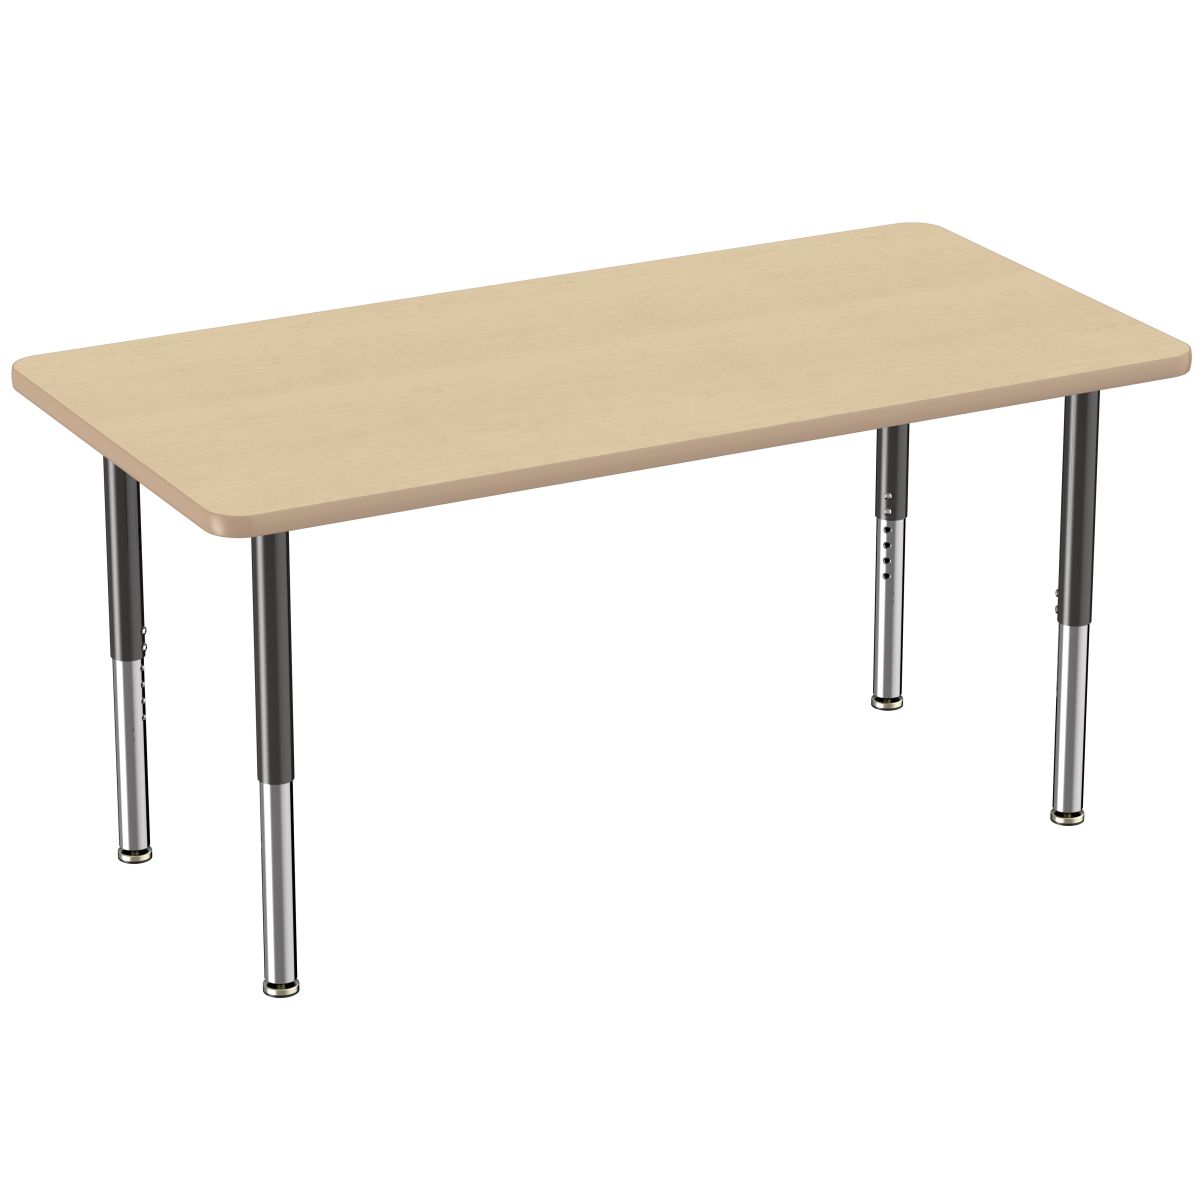 10026-mpmp 30 X 60 In. Rectangle T-mold Adjustable Activity Table With Super Leg - Maple